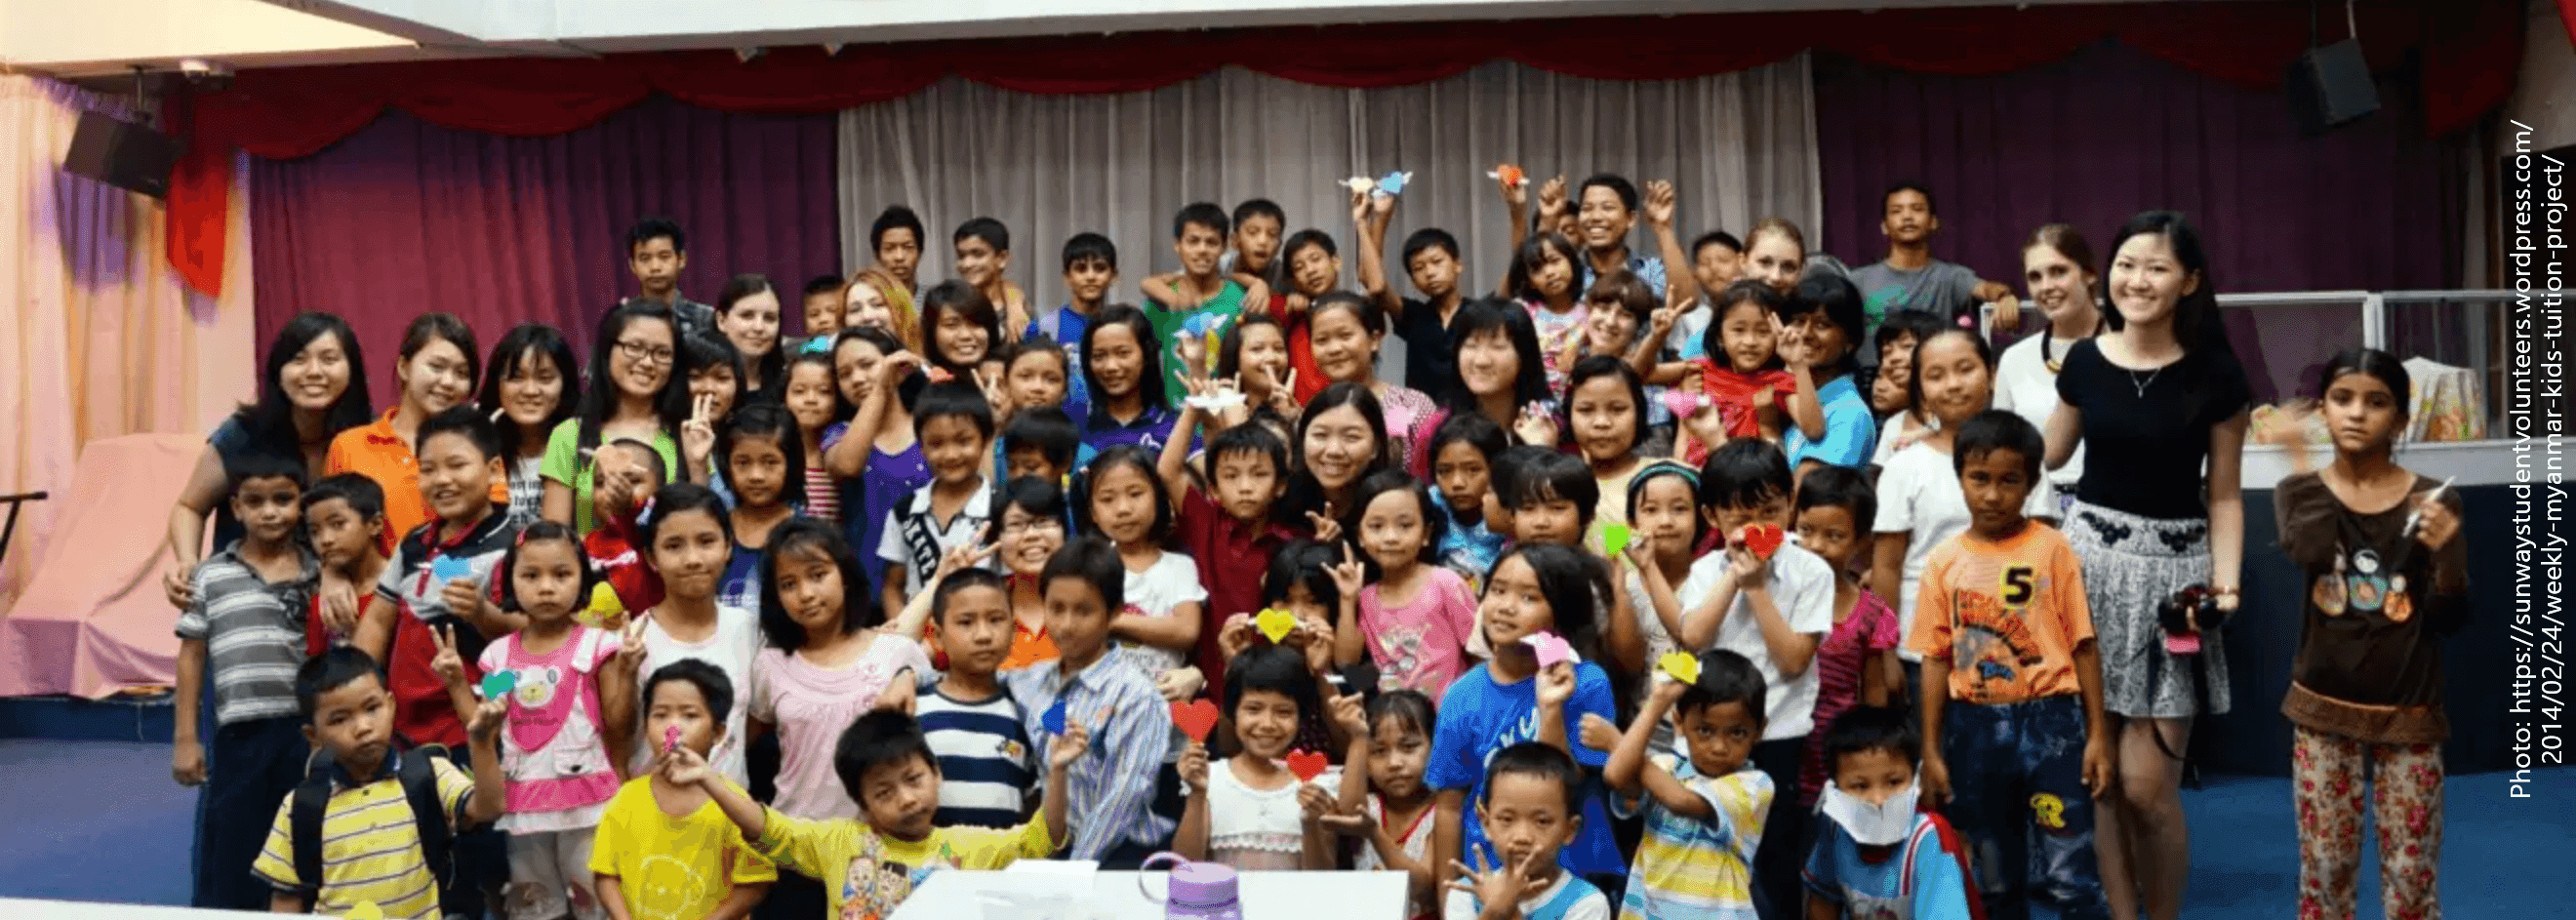 Refugee Children in Malaysia learning via mySecondTeacher(MST)